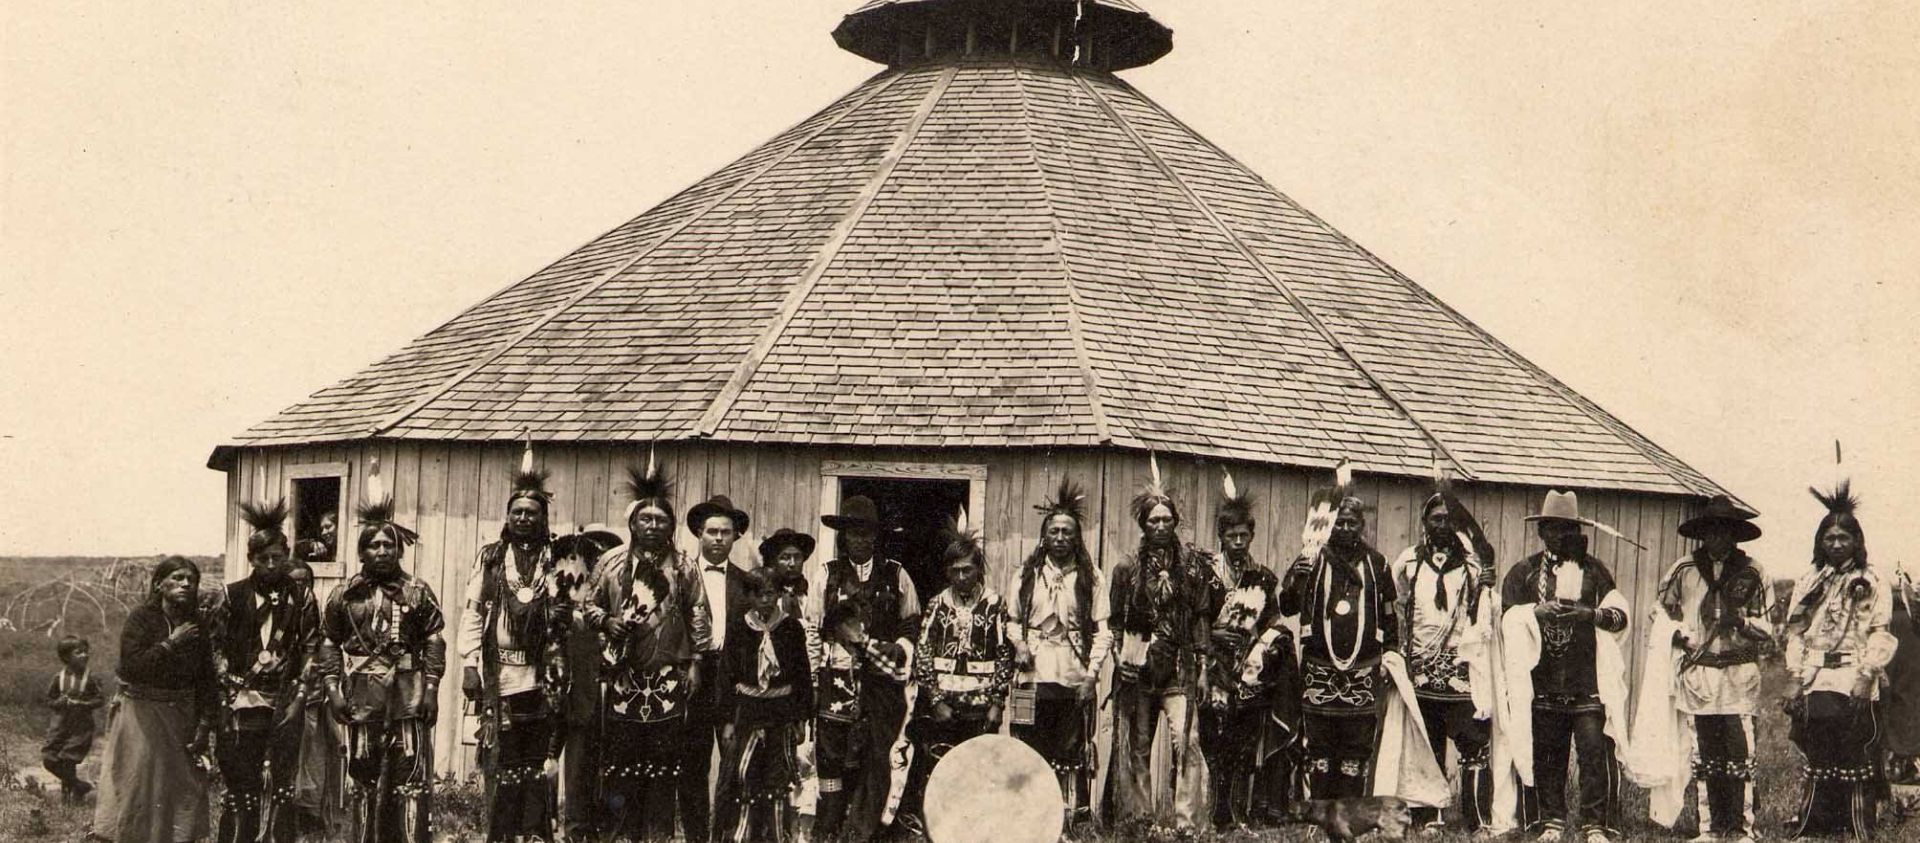 The Inlonshka, has been an important part of Osage life since 1884. The four-day ceremony is celebrated in each Osage district every year in June. The Grayhorse district is currently celebrating and continuing our Osage traditional values this weekend. The below photograph by Vince Dillon shows Osage dancers from the Grayhorse district in 1912 in front of the old roundhouse.